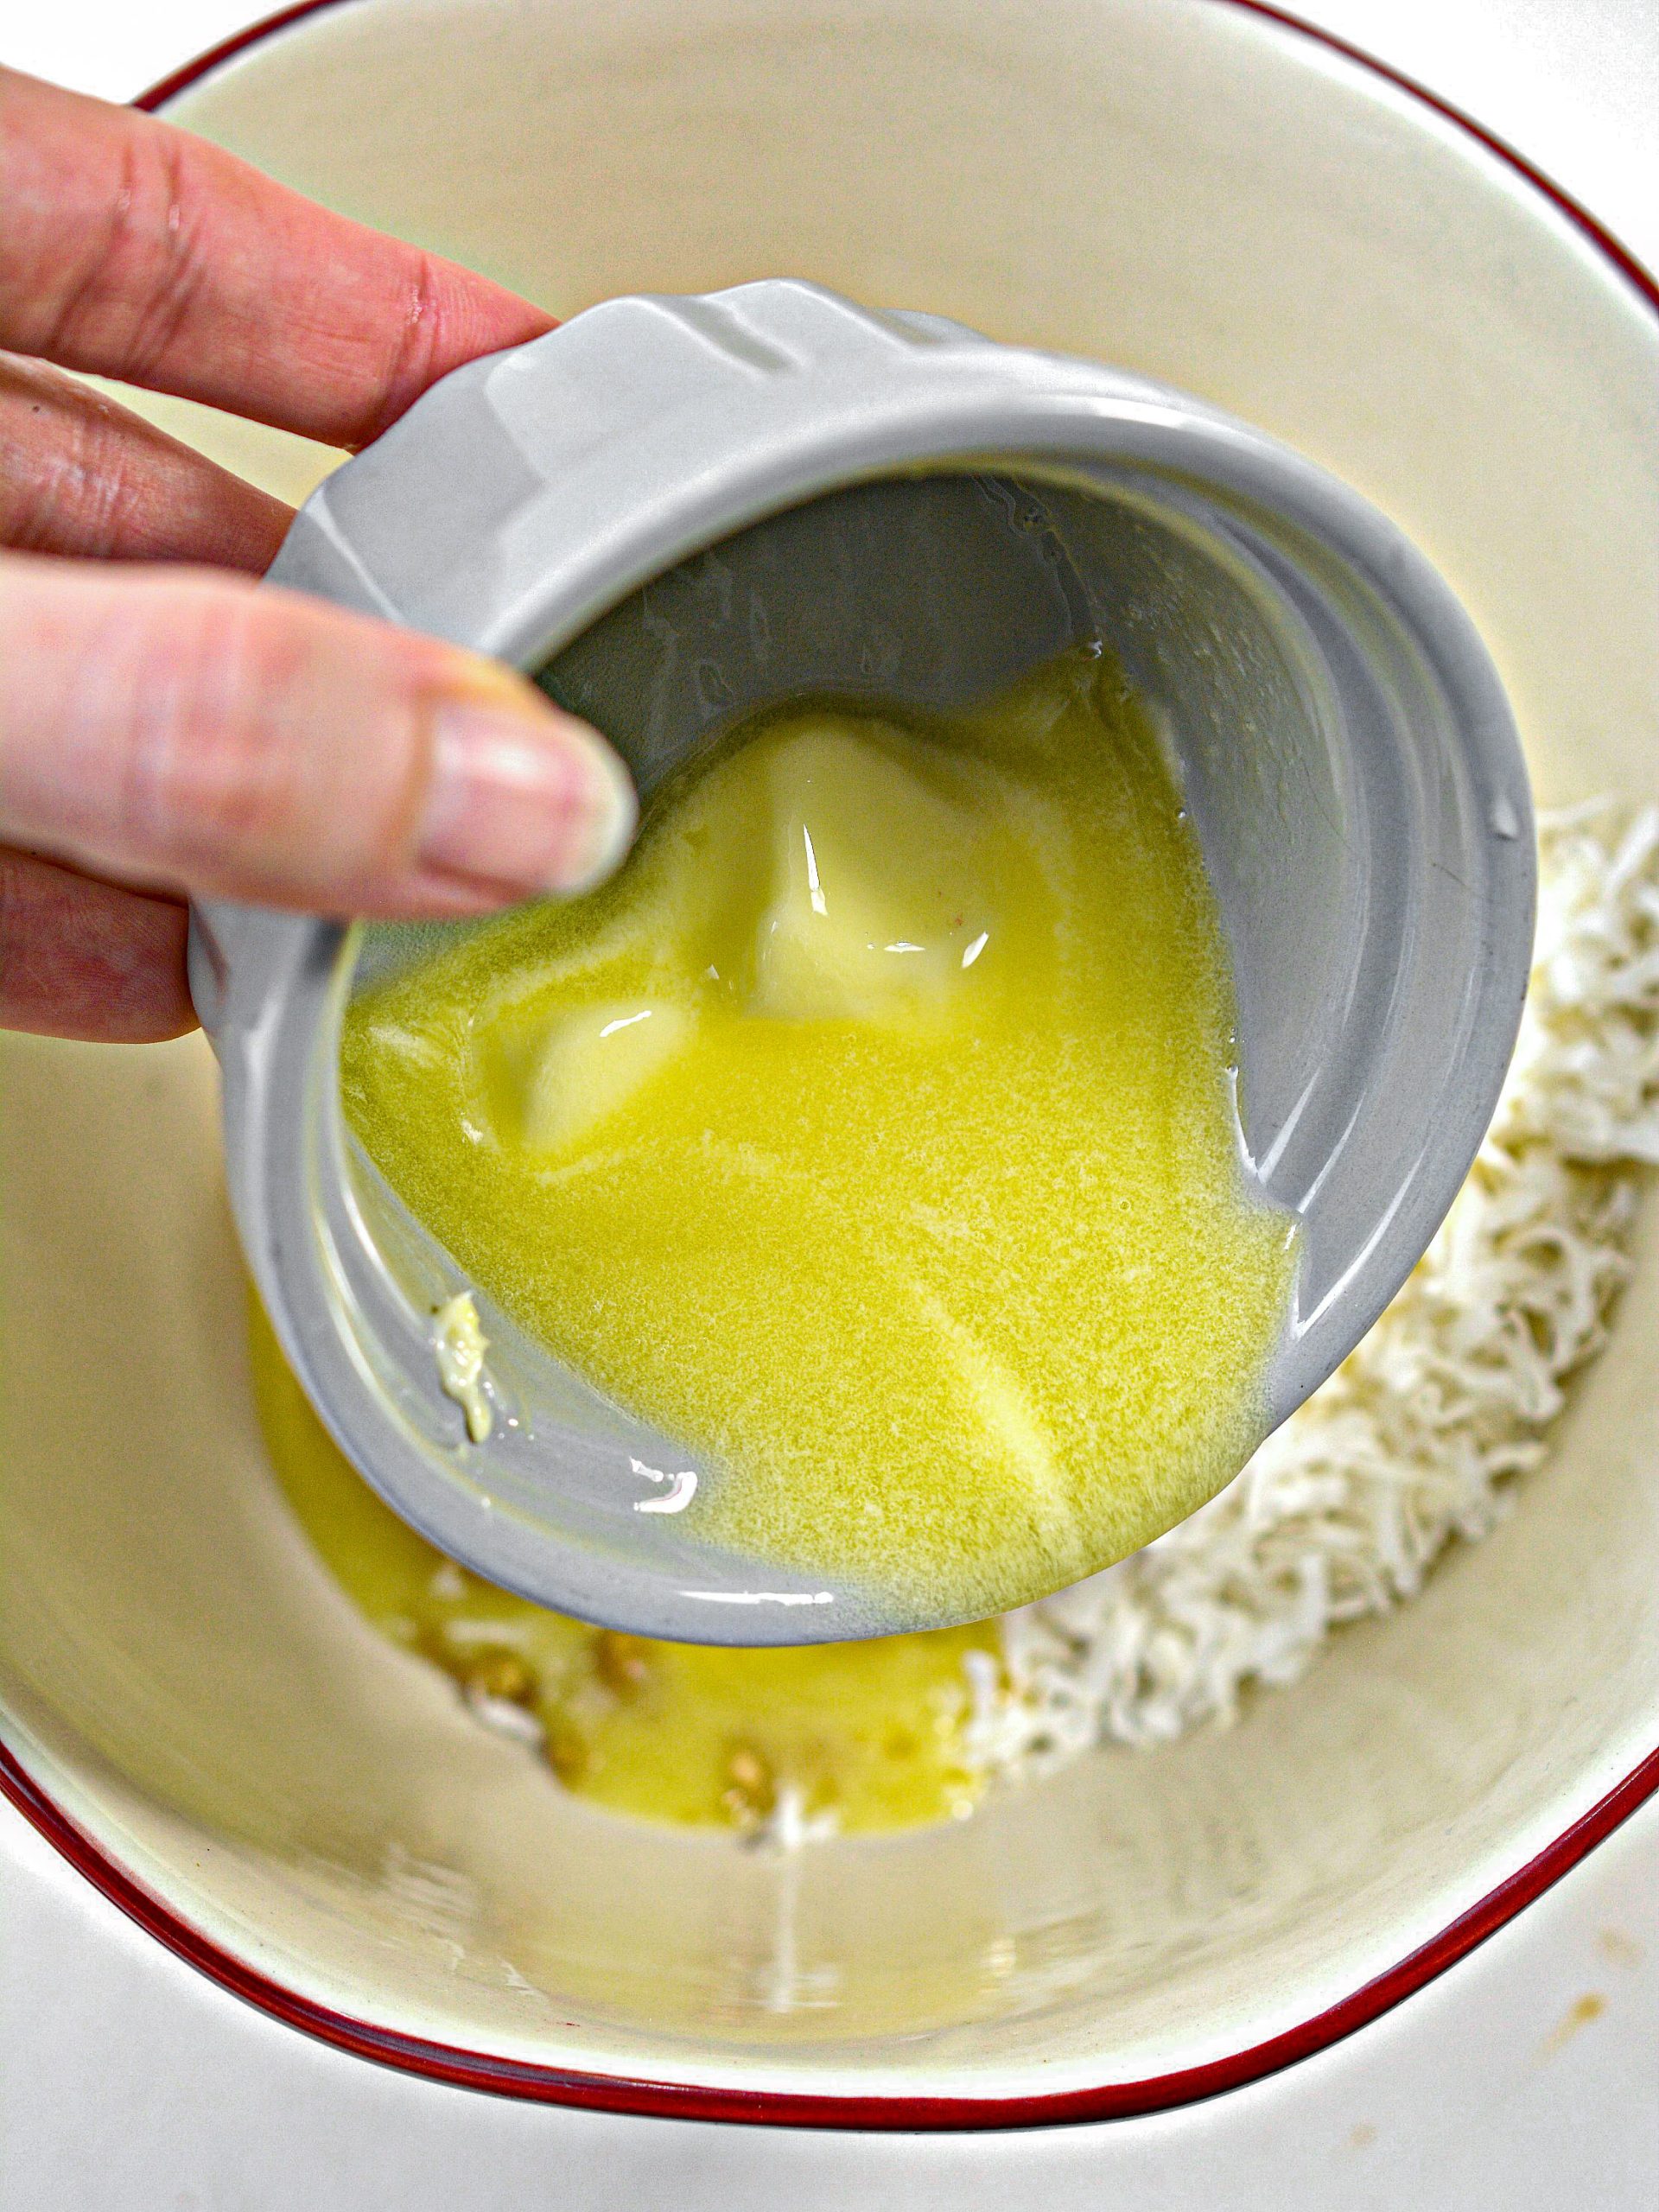 While the cake is baking, mix together the ingredients for the topping.